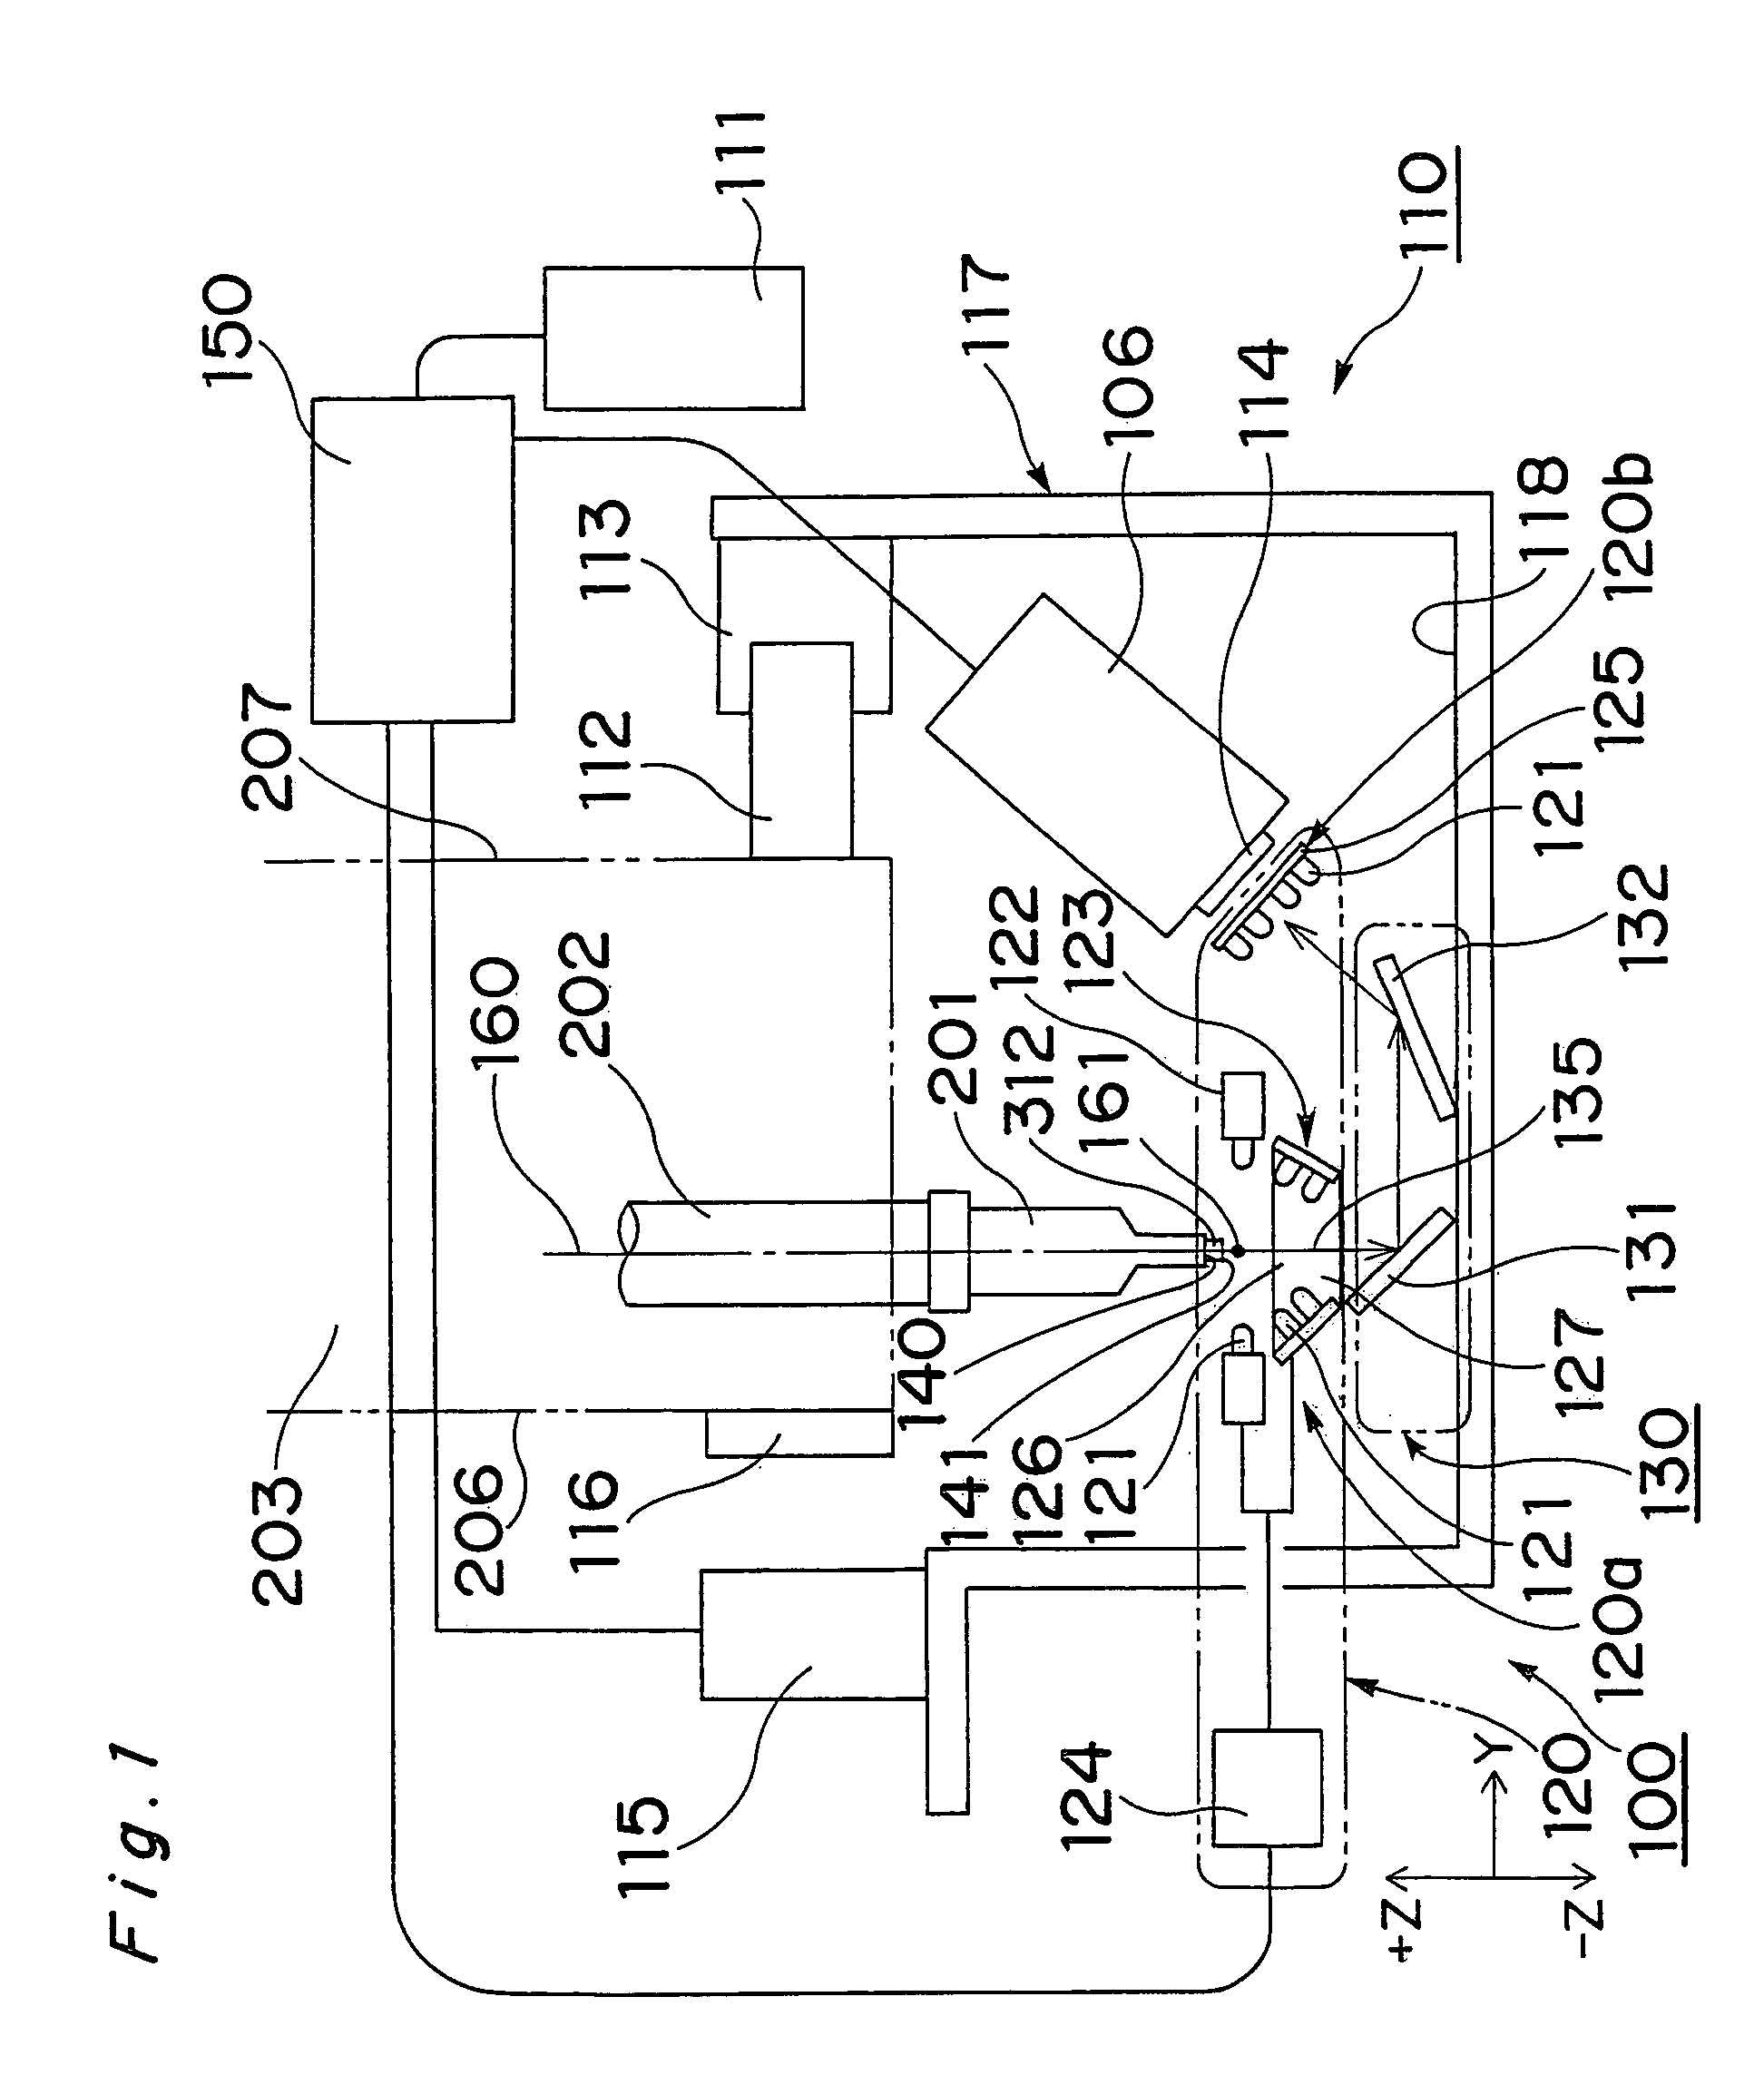 Method for determining whether a component holder is defective